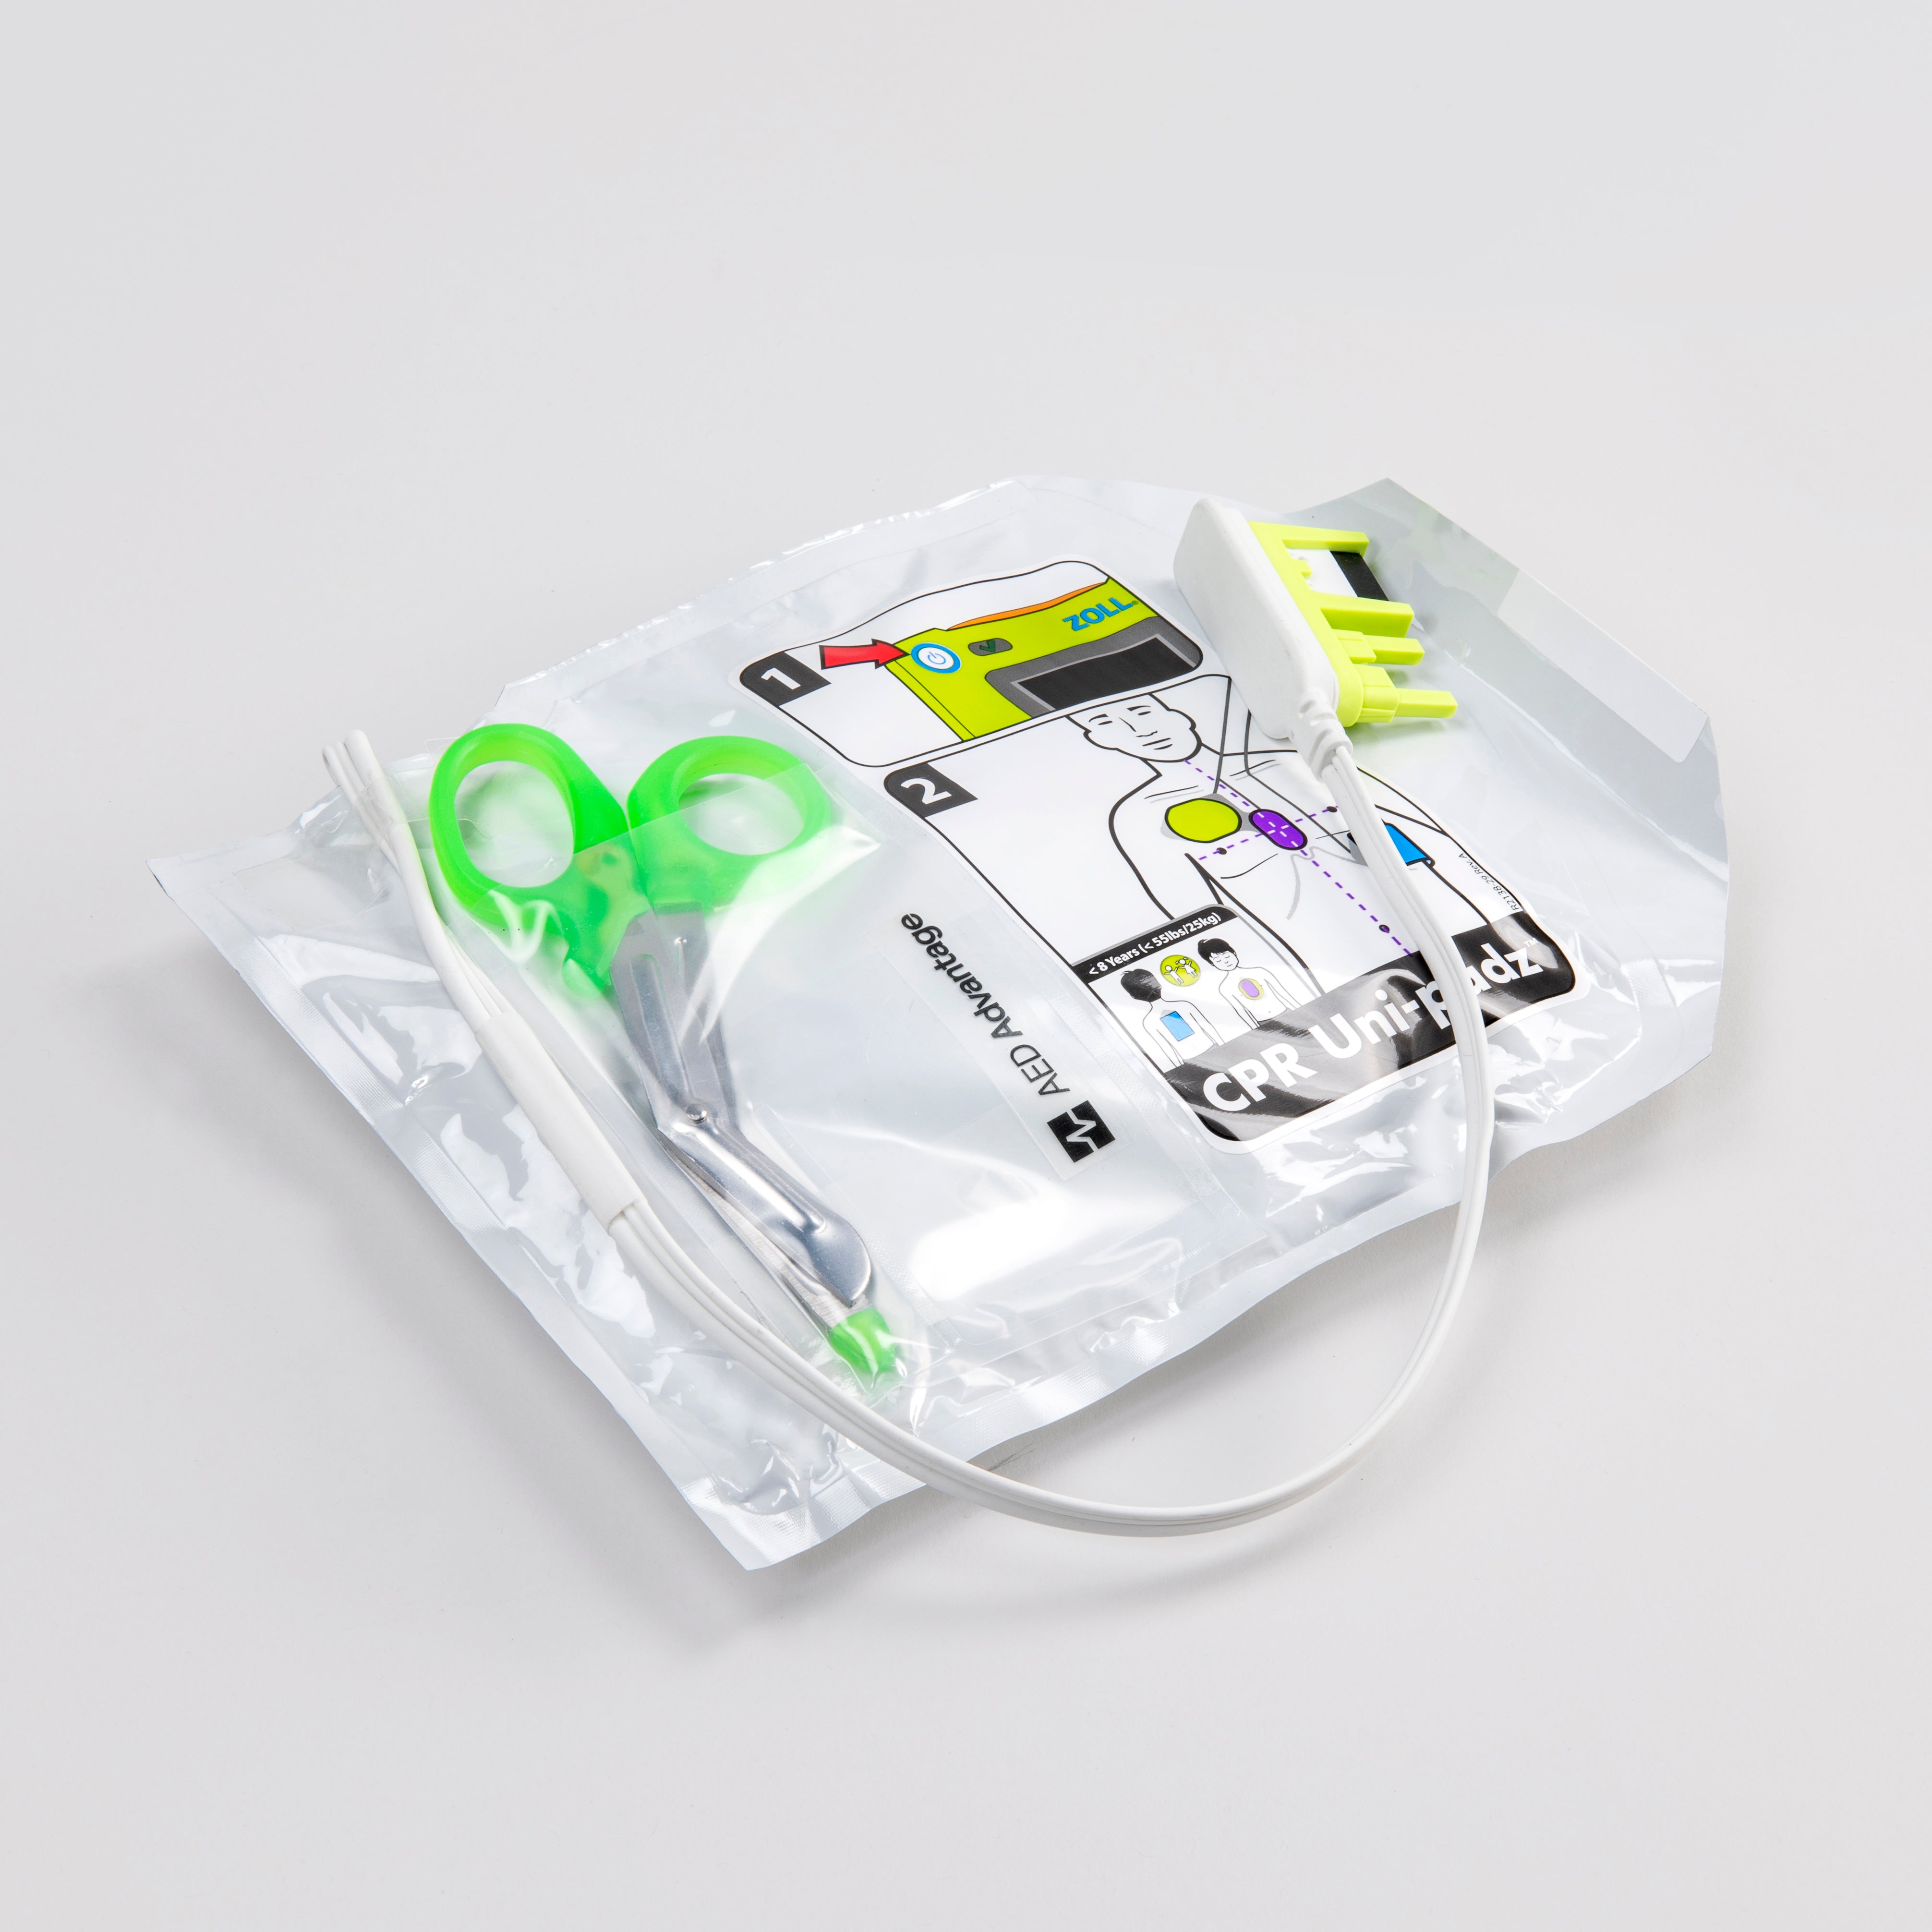 White foil package with scissors containing electrodes for the ZOLL AED 3 defibrillator